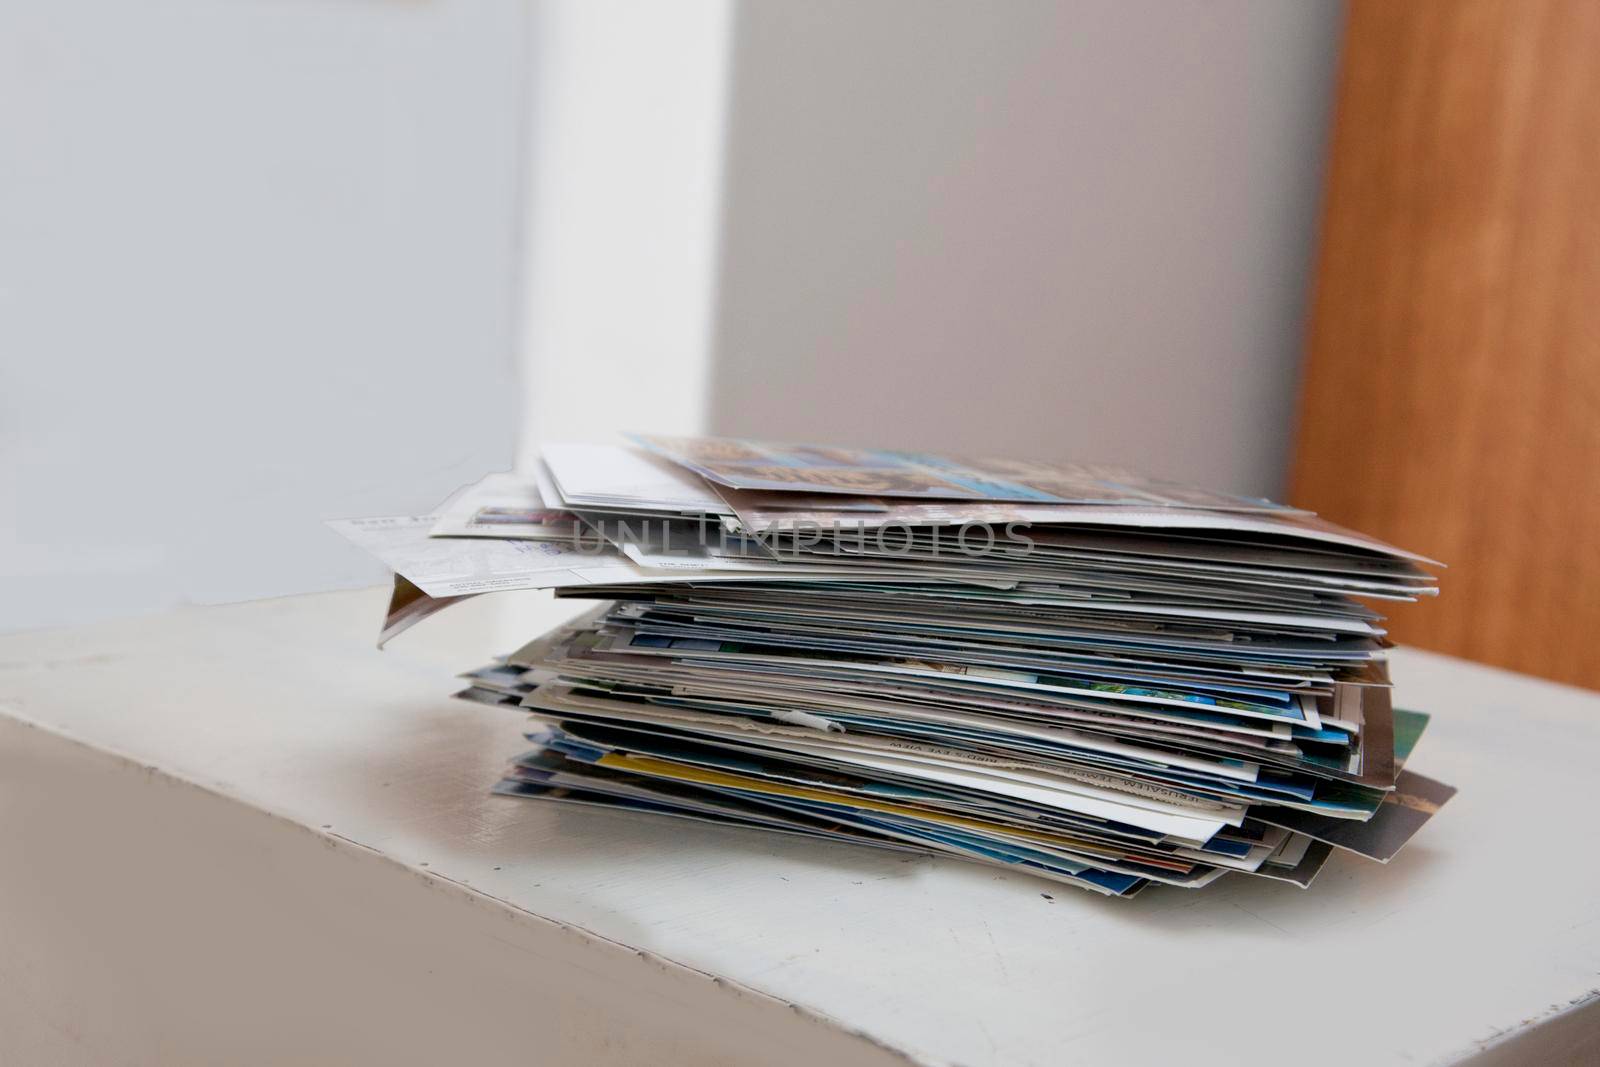 A stack of postcards or mail  by rustycanuck